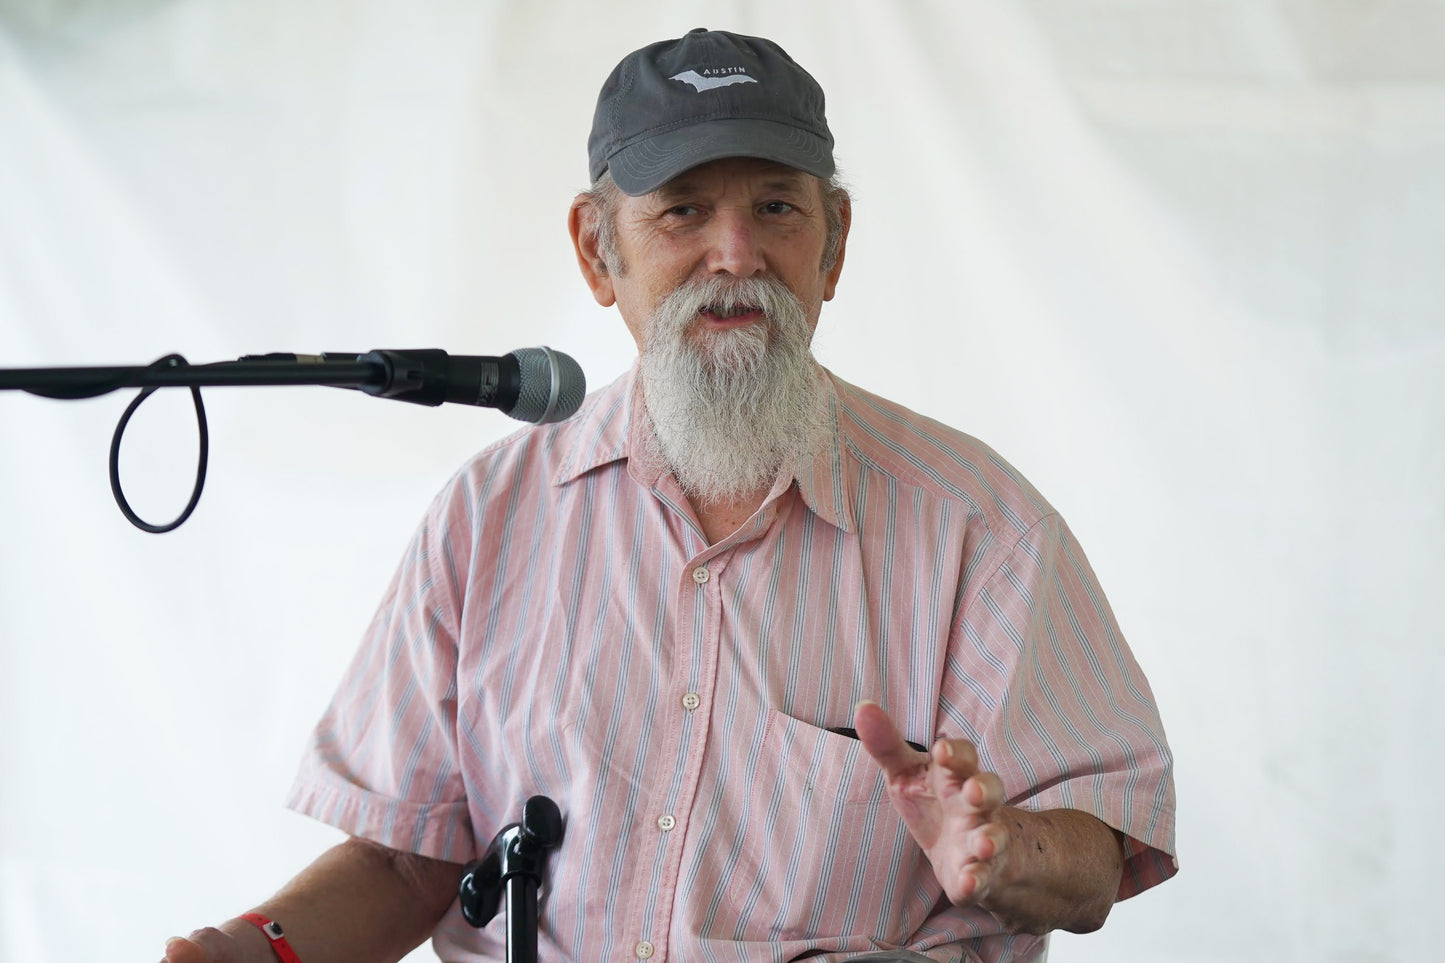 Jim Franklin conducting a workshop at the 2023 Old Settler's Music Festival